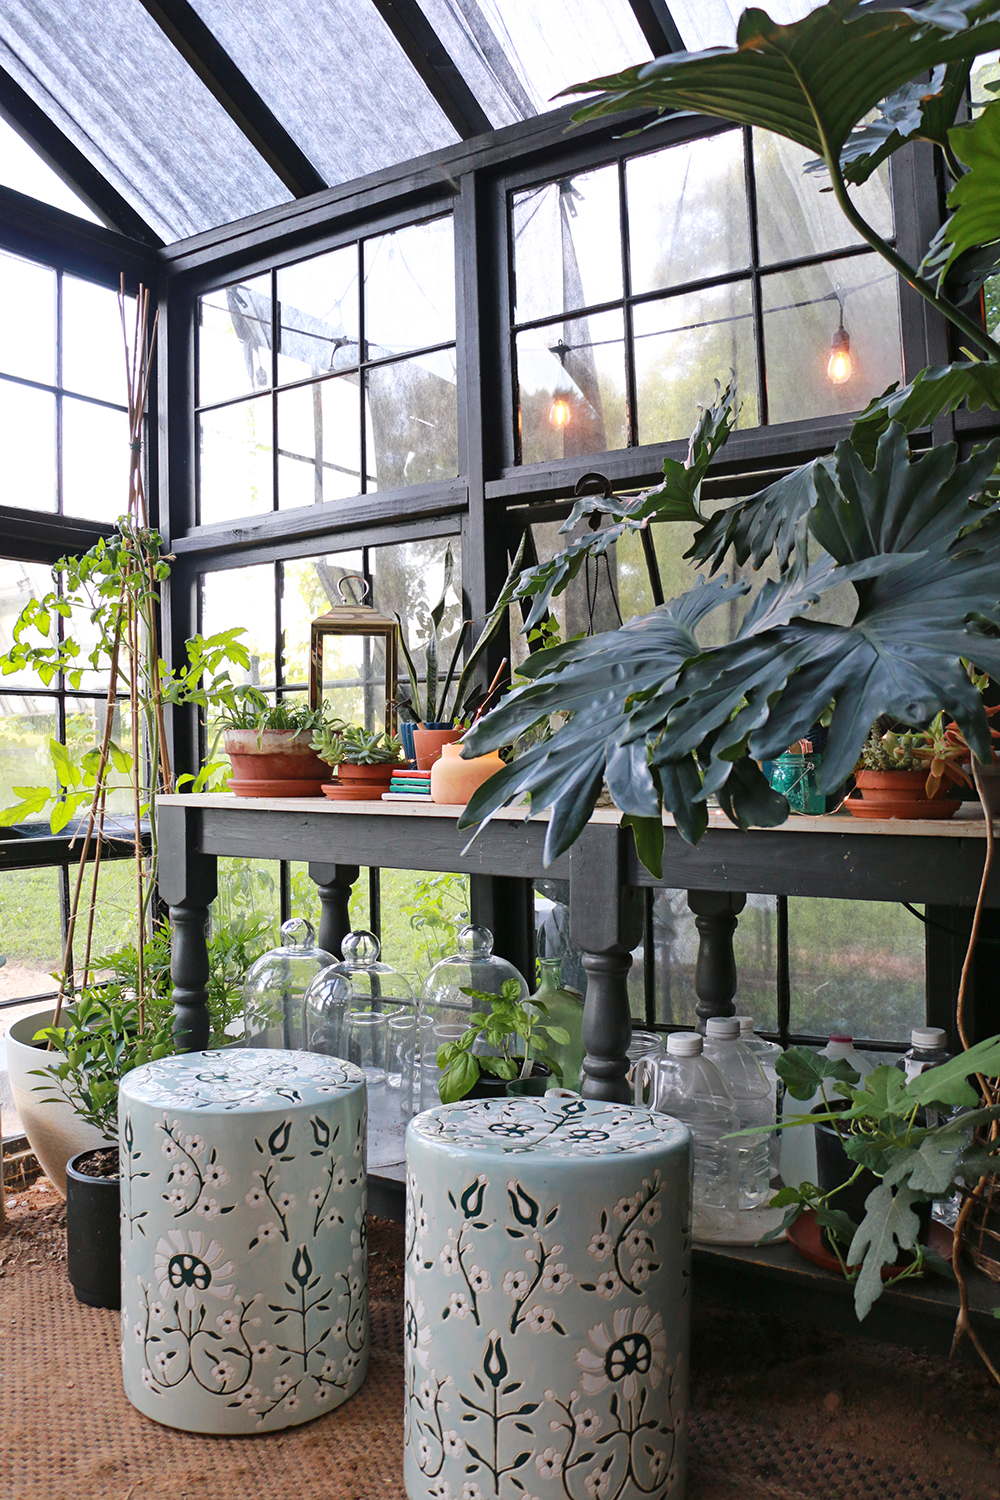 Greenhouse decorating with garden stools